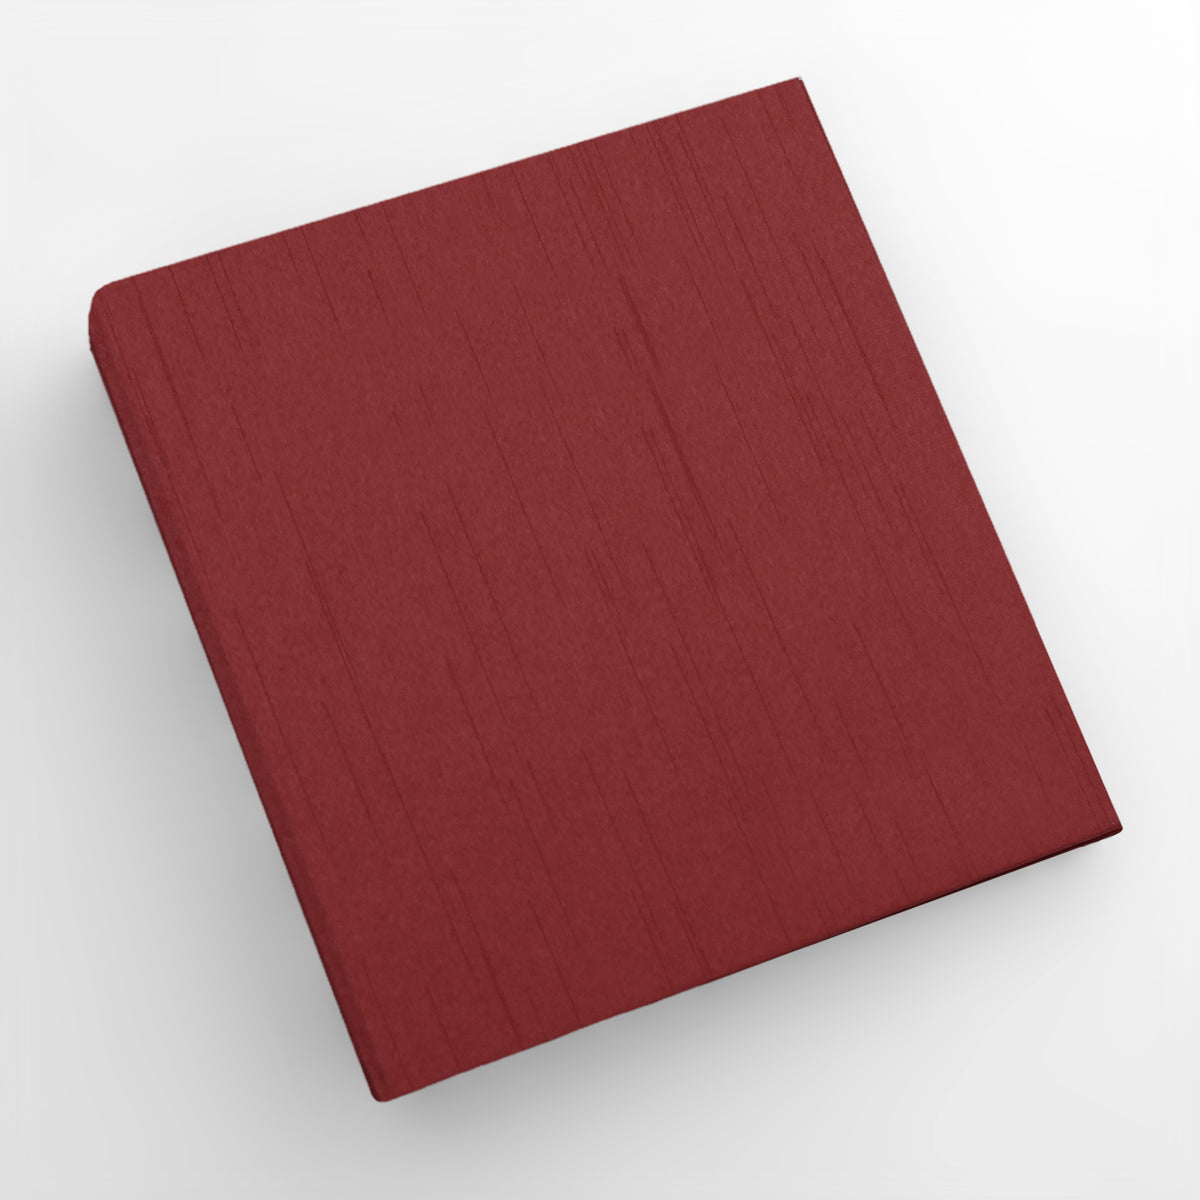 Large Photo Binder | for 8x10 Photos | with Garnet Silk Cover